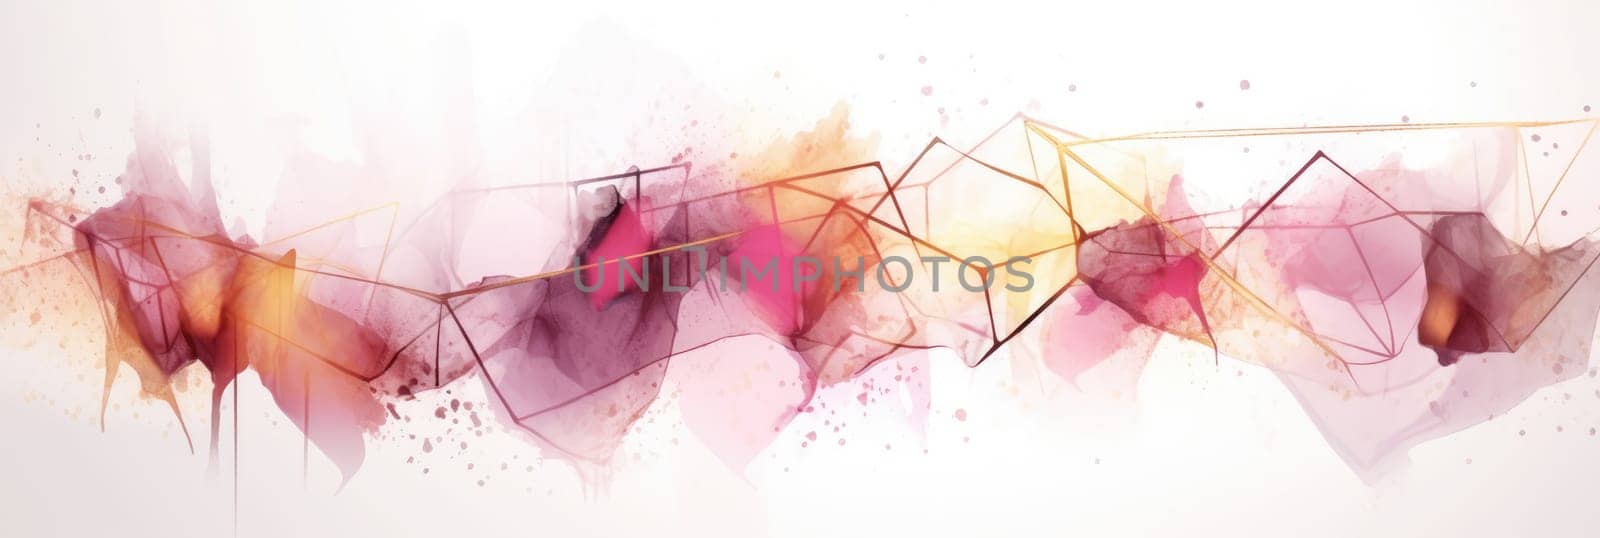 Abstract watercolor artwork mixed with buzzy geometric shapes by biancoblue